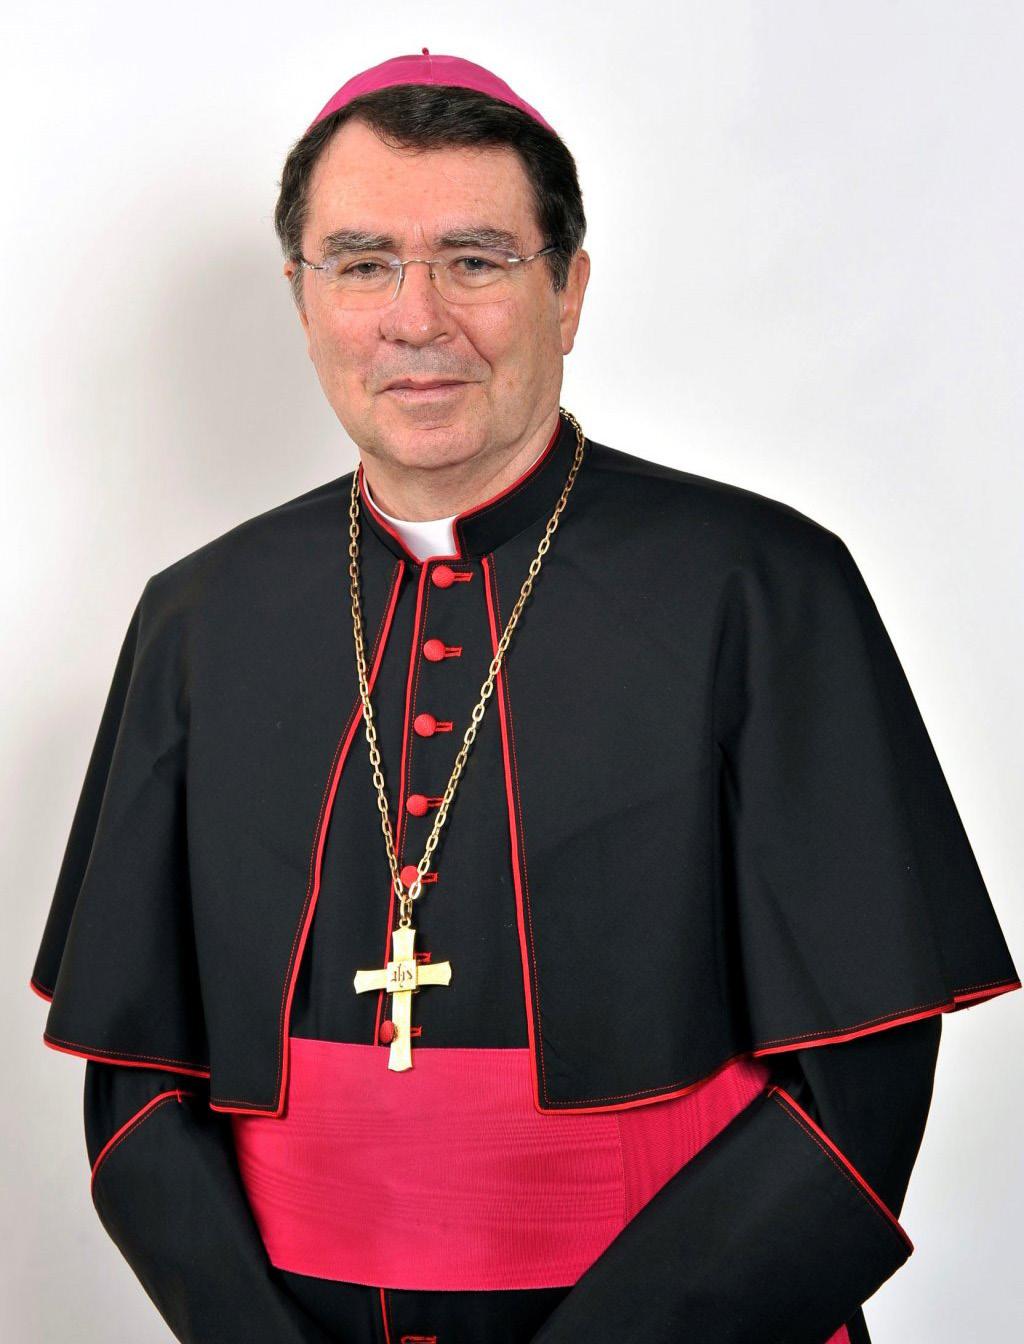 His Excellency The Most Reverend Christophe Pierre